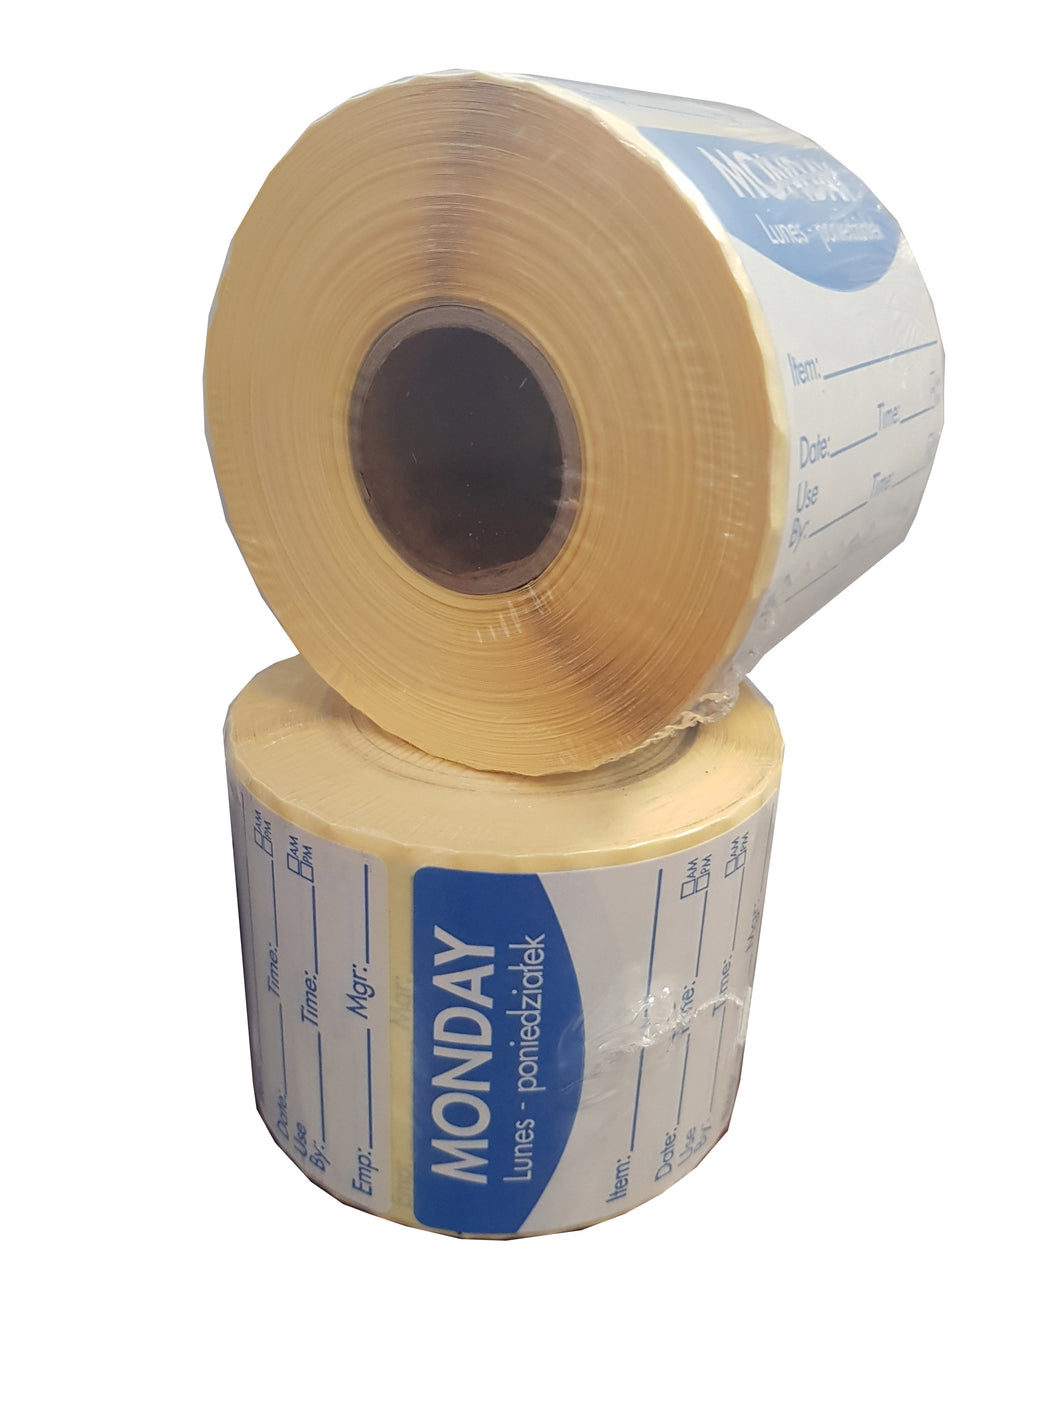 Food Safety Day Label, Removable Adhesive, 51mm Square. 1 roll of 500